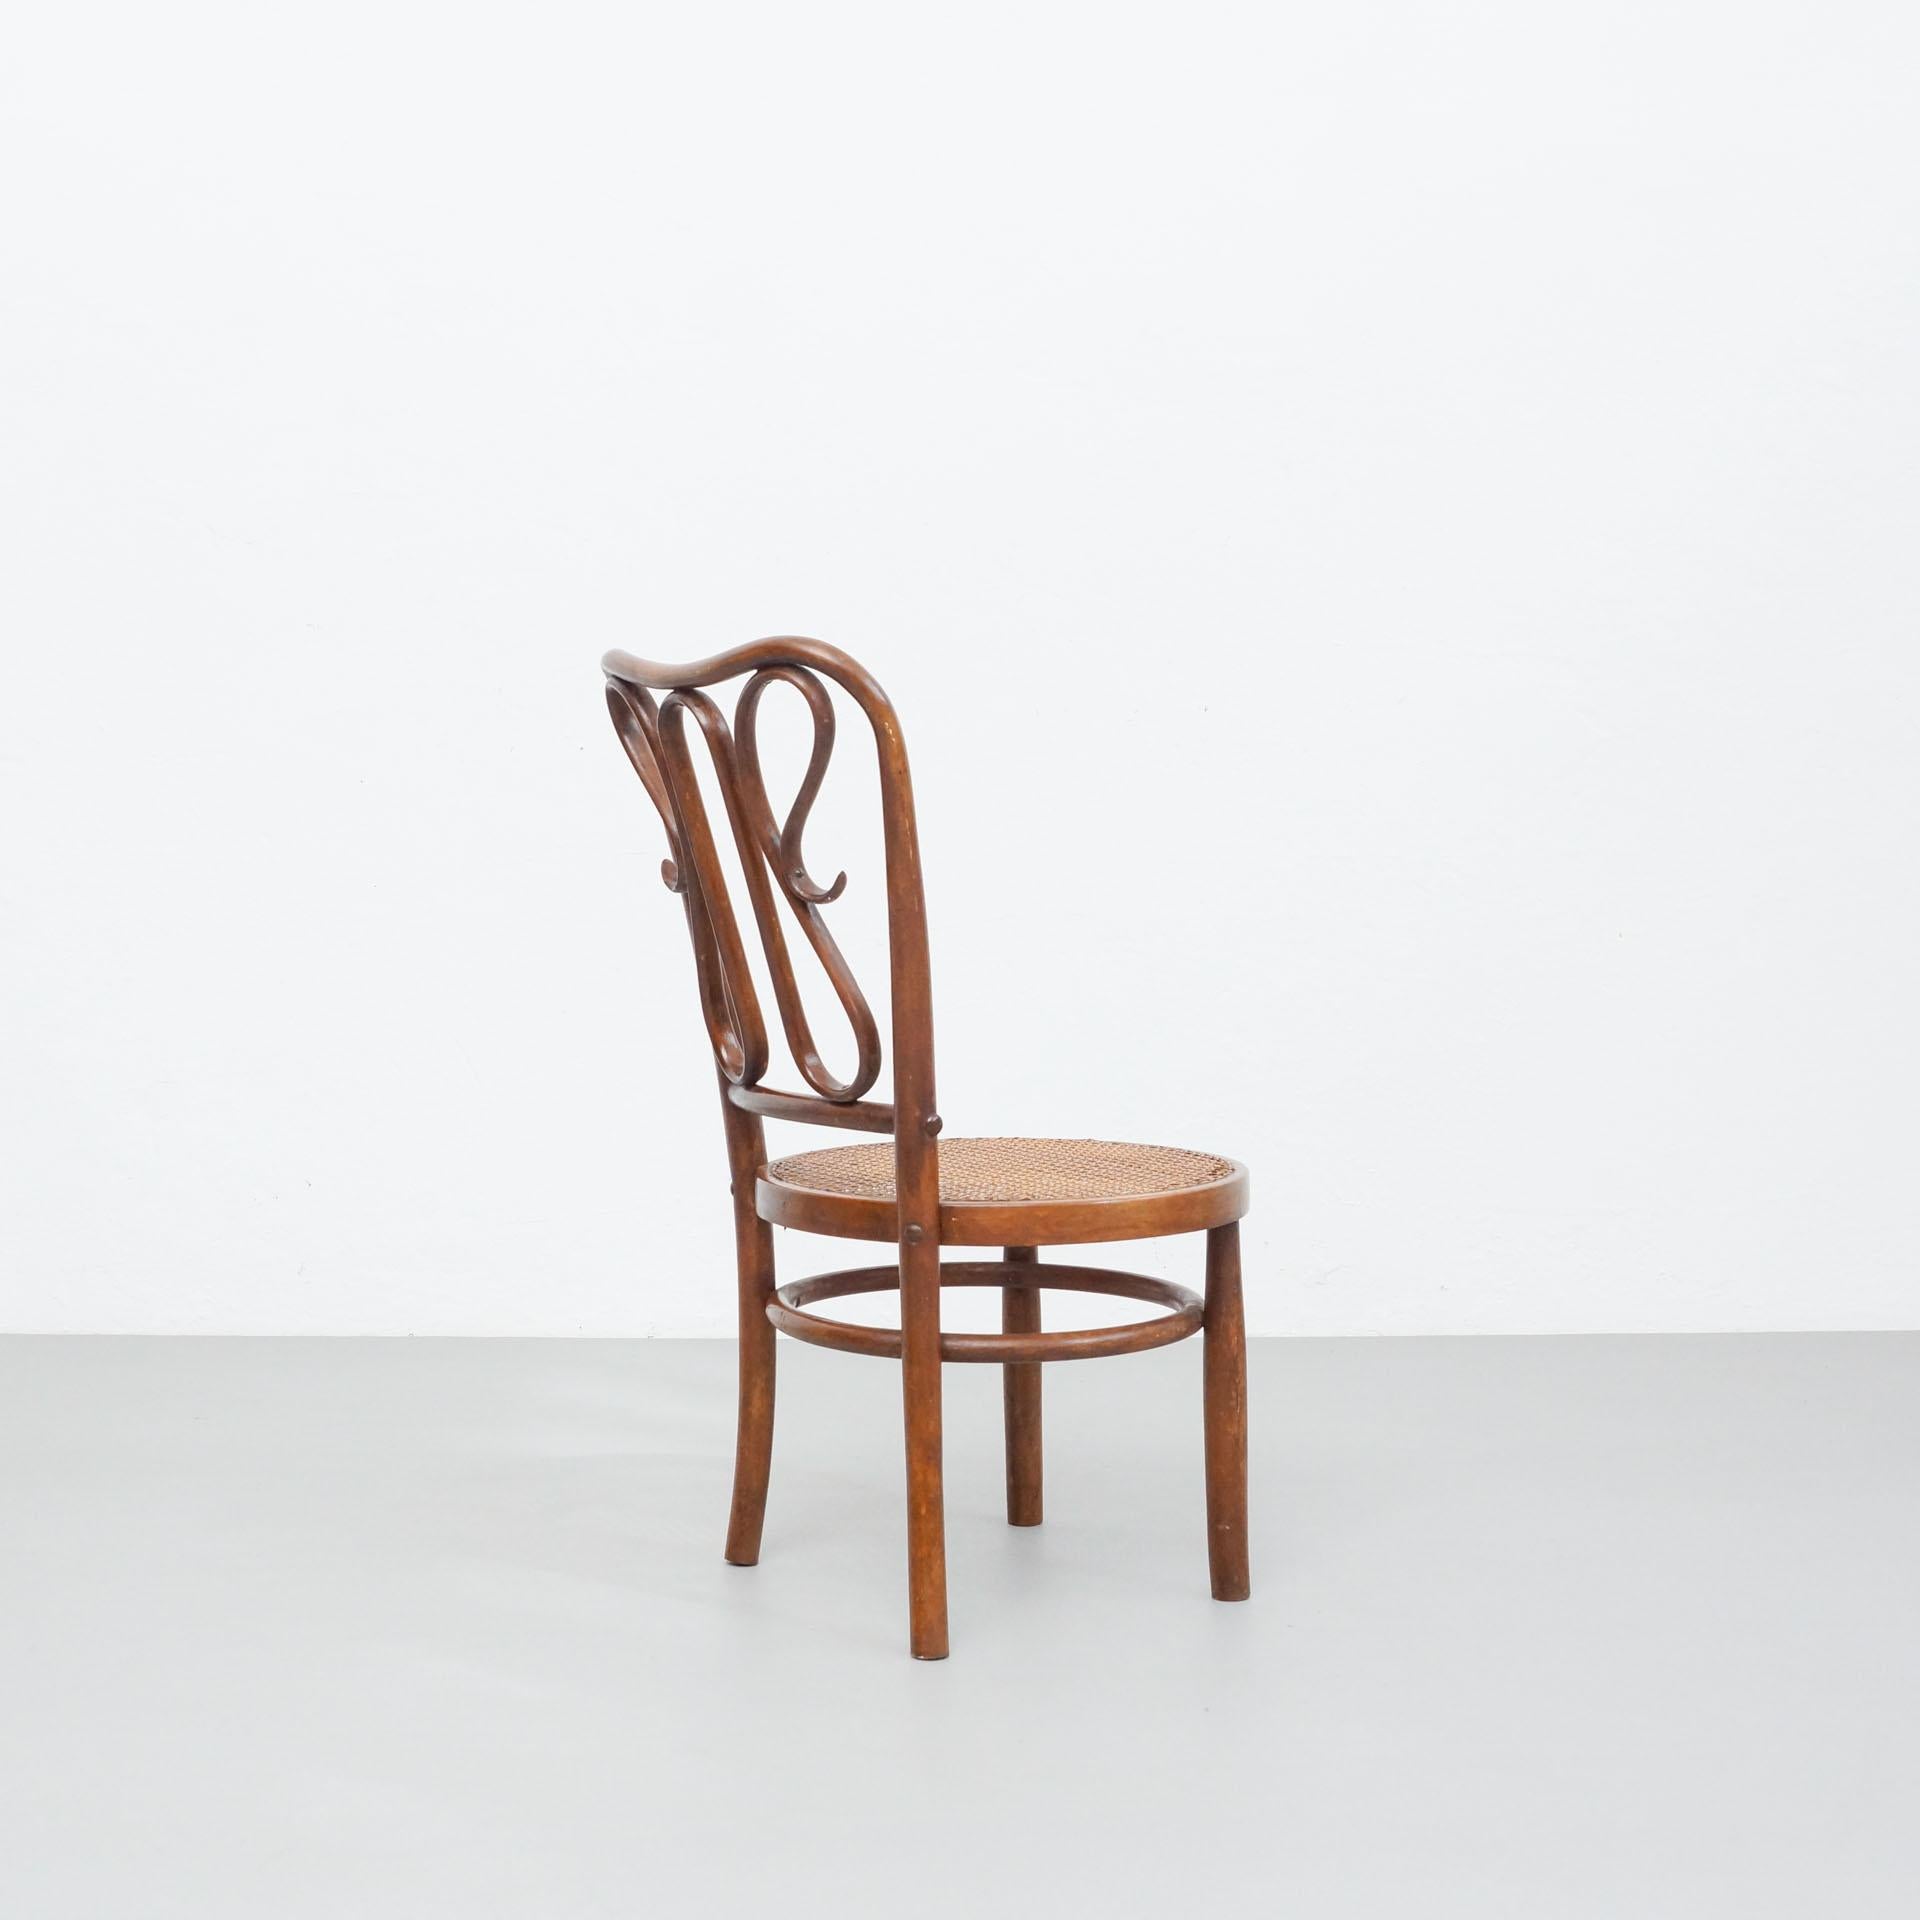 French Bentwood Chair in the Style of Thonet, Rattan and Wood, circa 1940 For Sale